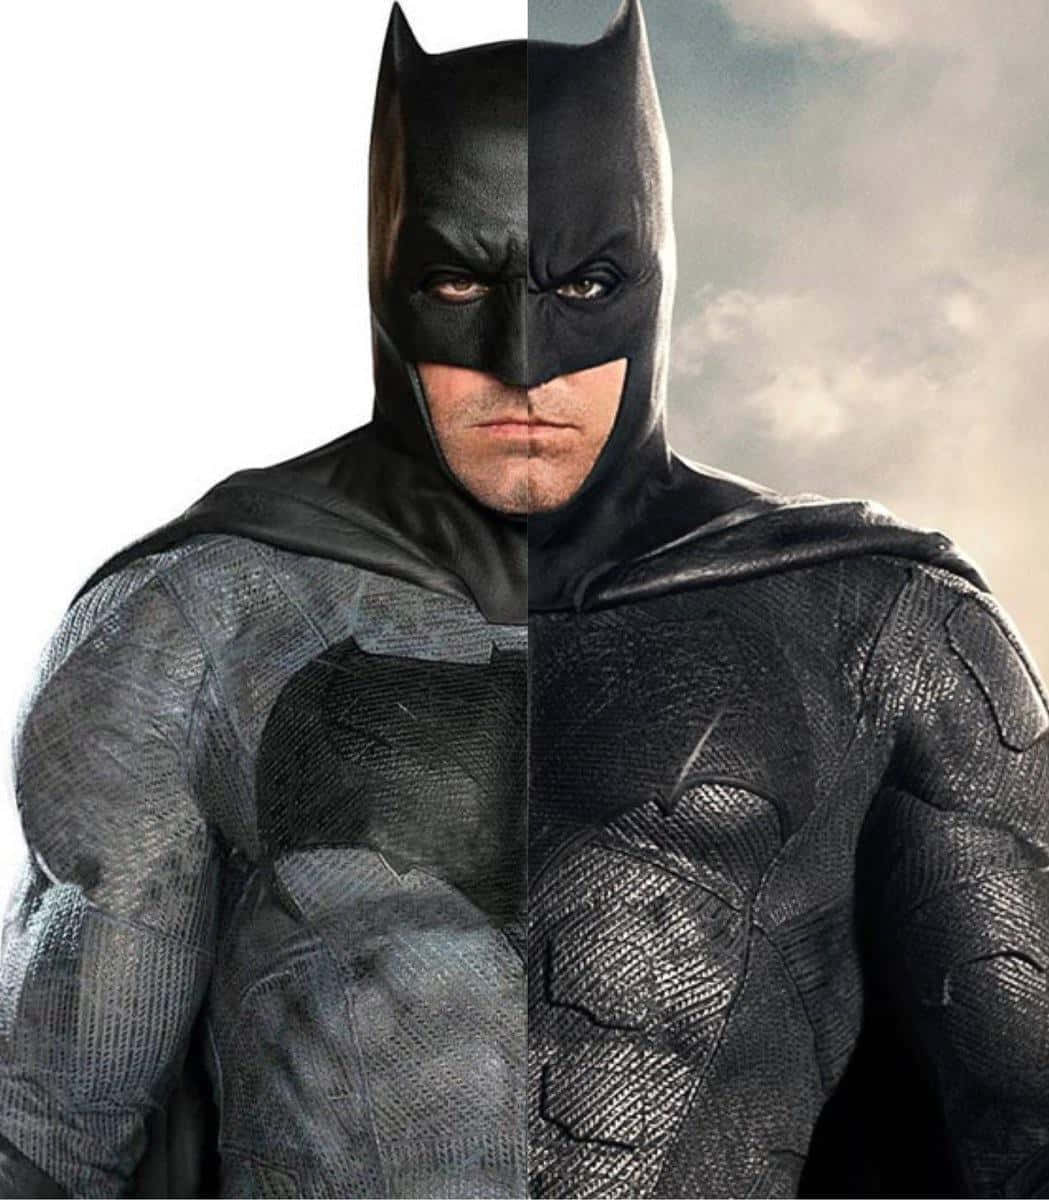 The Iconic Bat-suit Worn by Batman in the Dark Knight Series Wallpaper